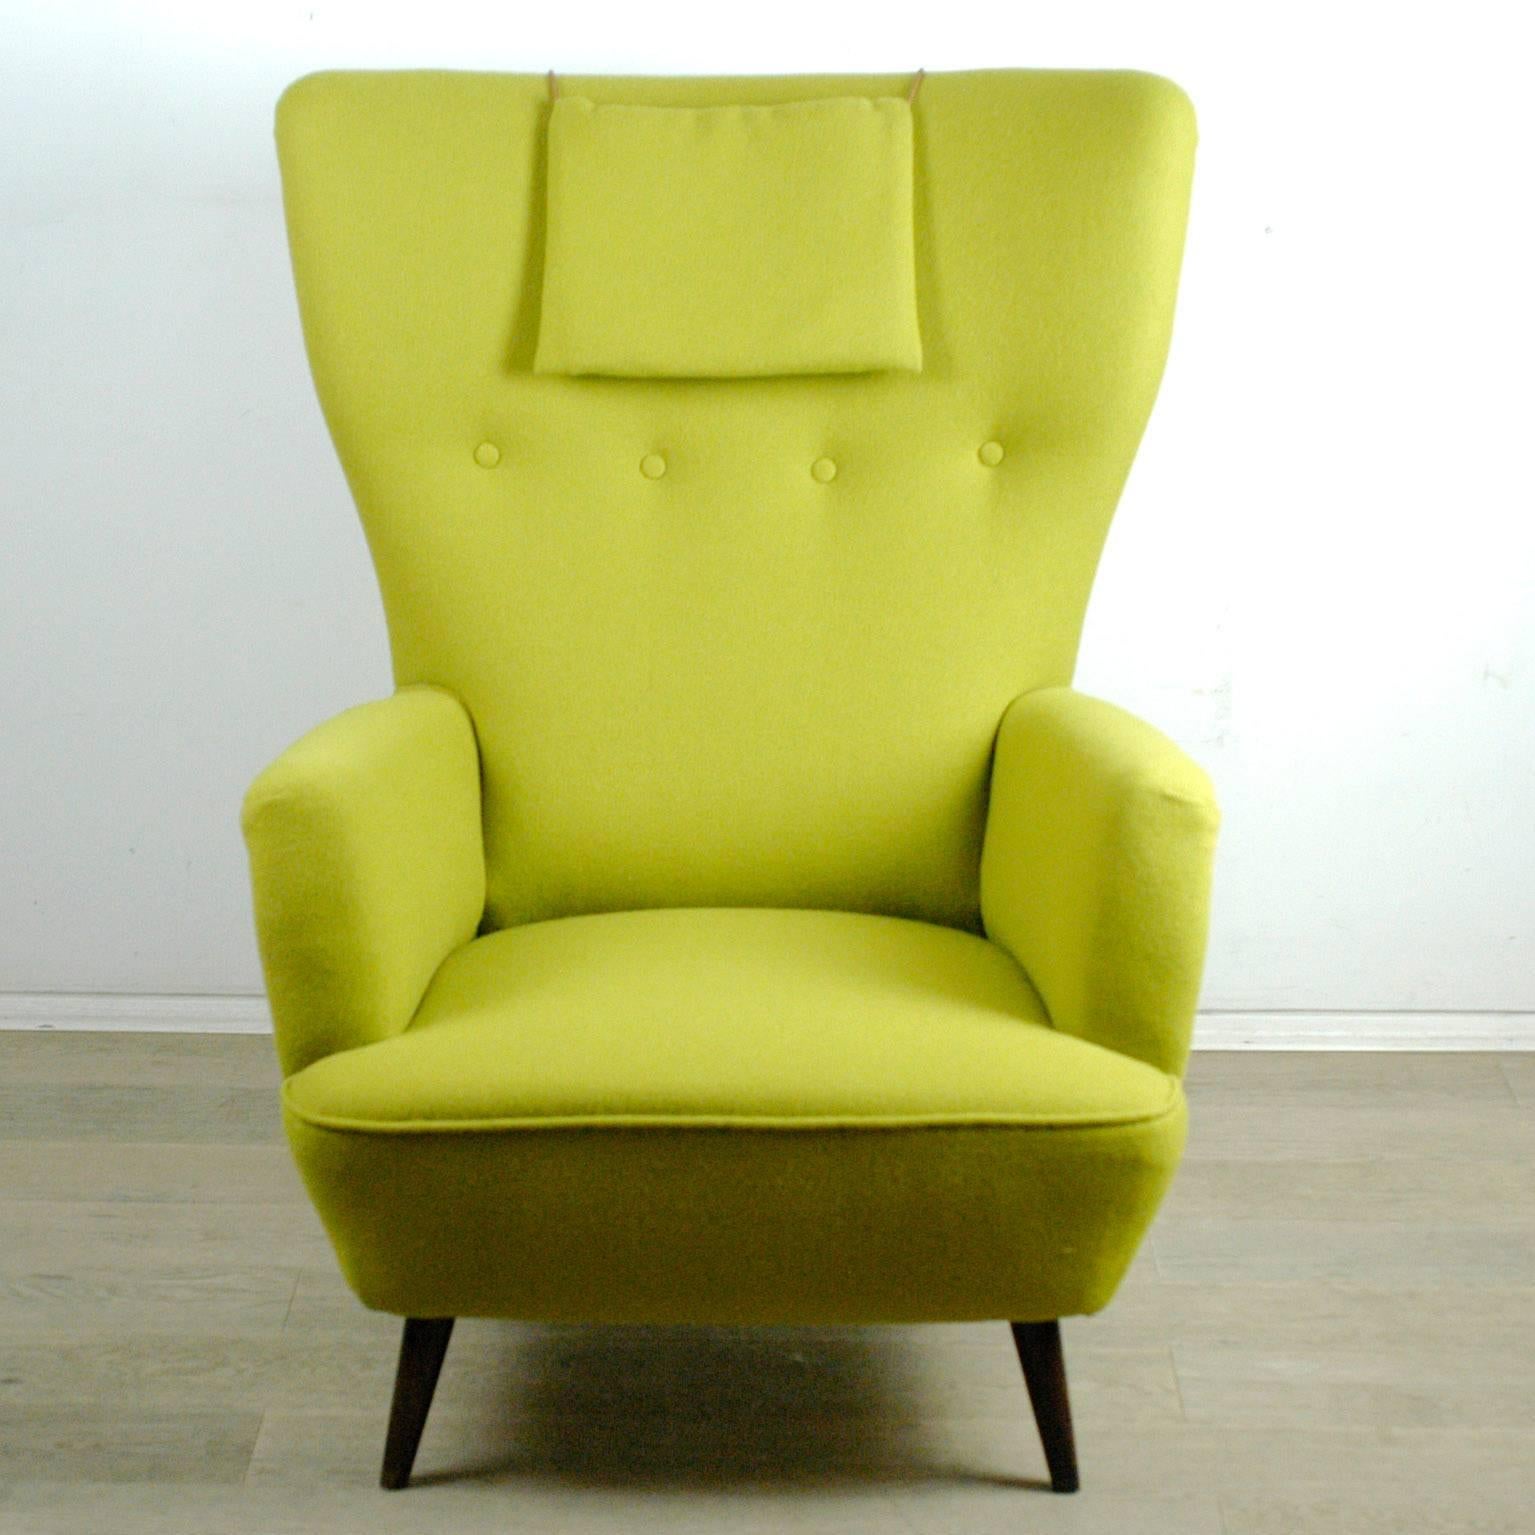 Highly comfortable Austrian 1950s highback Armchair with walnut legs, new upholstery with top quality Kvadrat fabric.